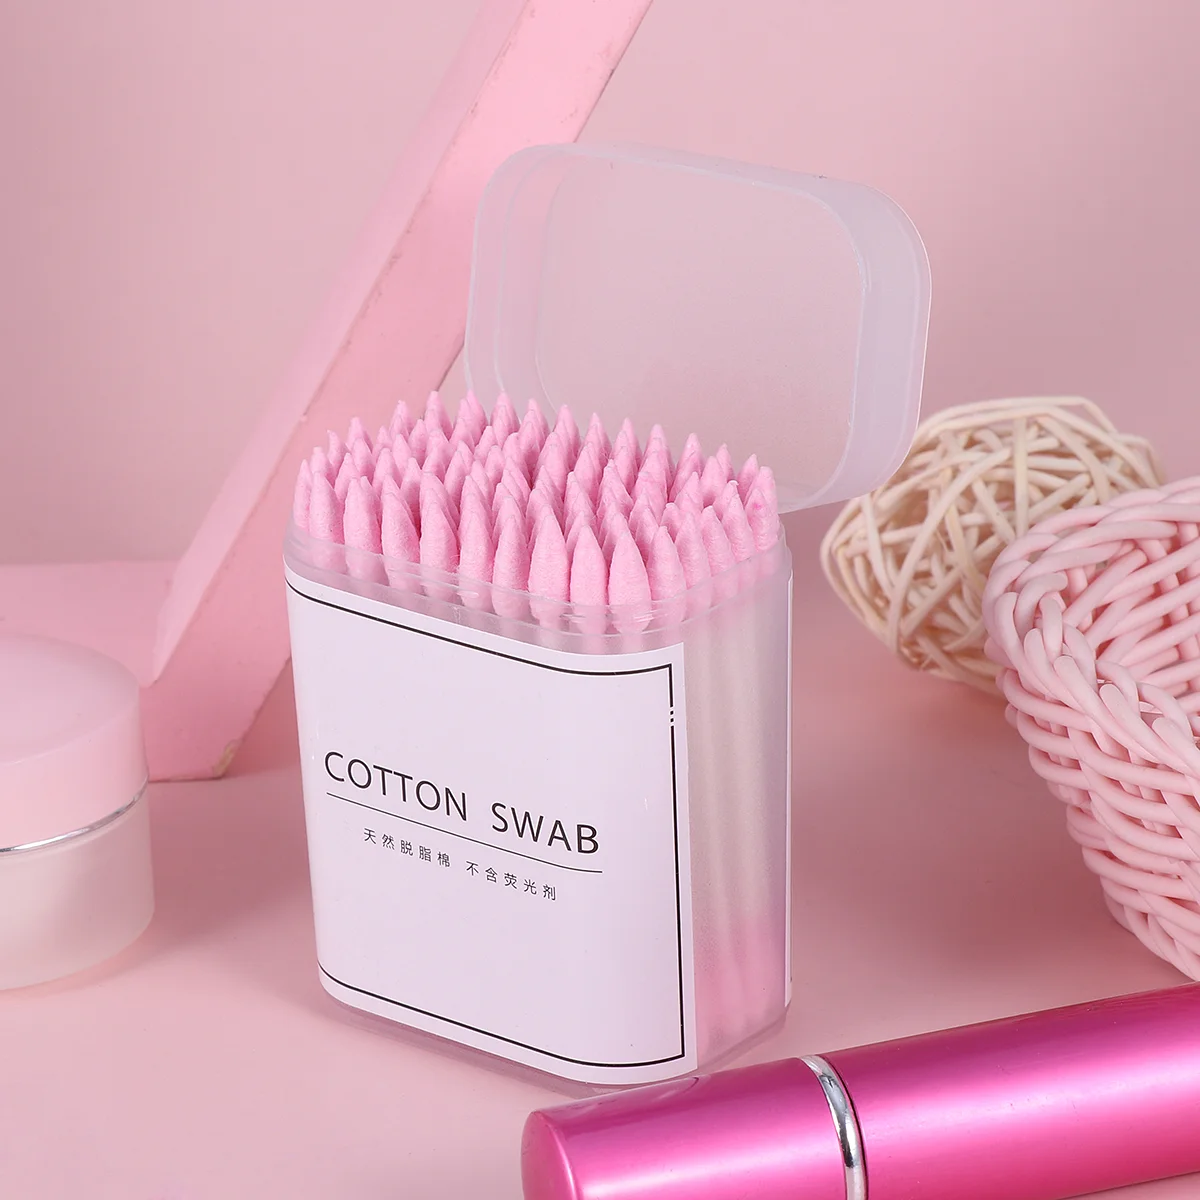 

3 Packs/300pcs Beauty Accessories Travel Ear Plugs Baby Cotton Swabs Buds Kids Disposable Makeup Tool Swabs